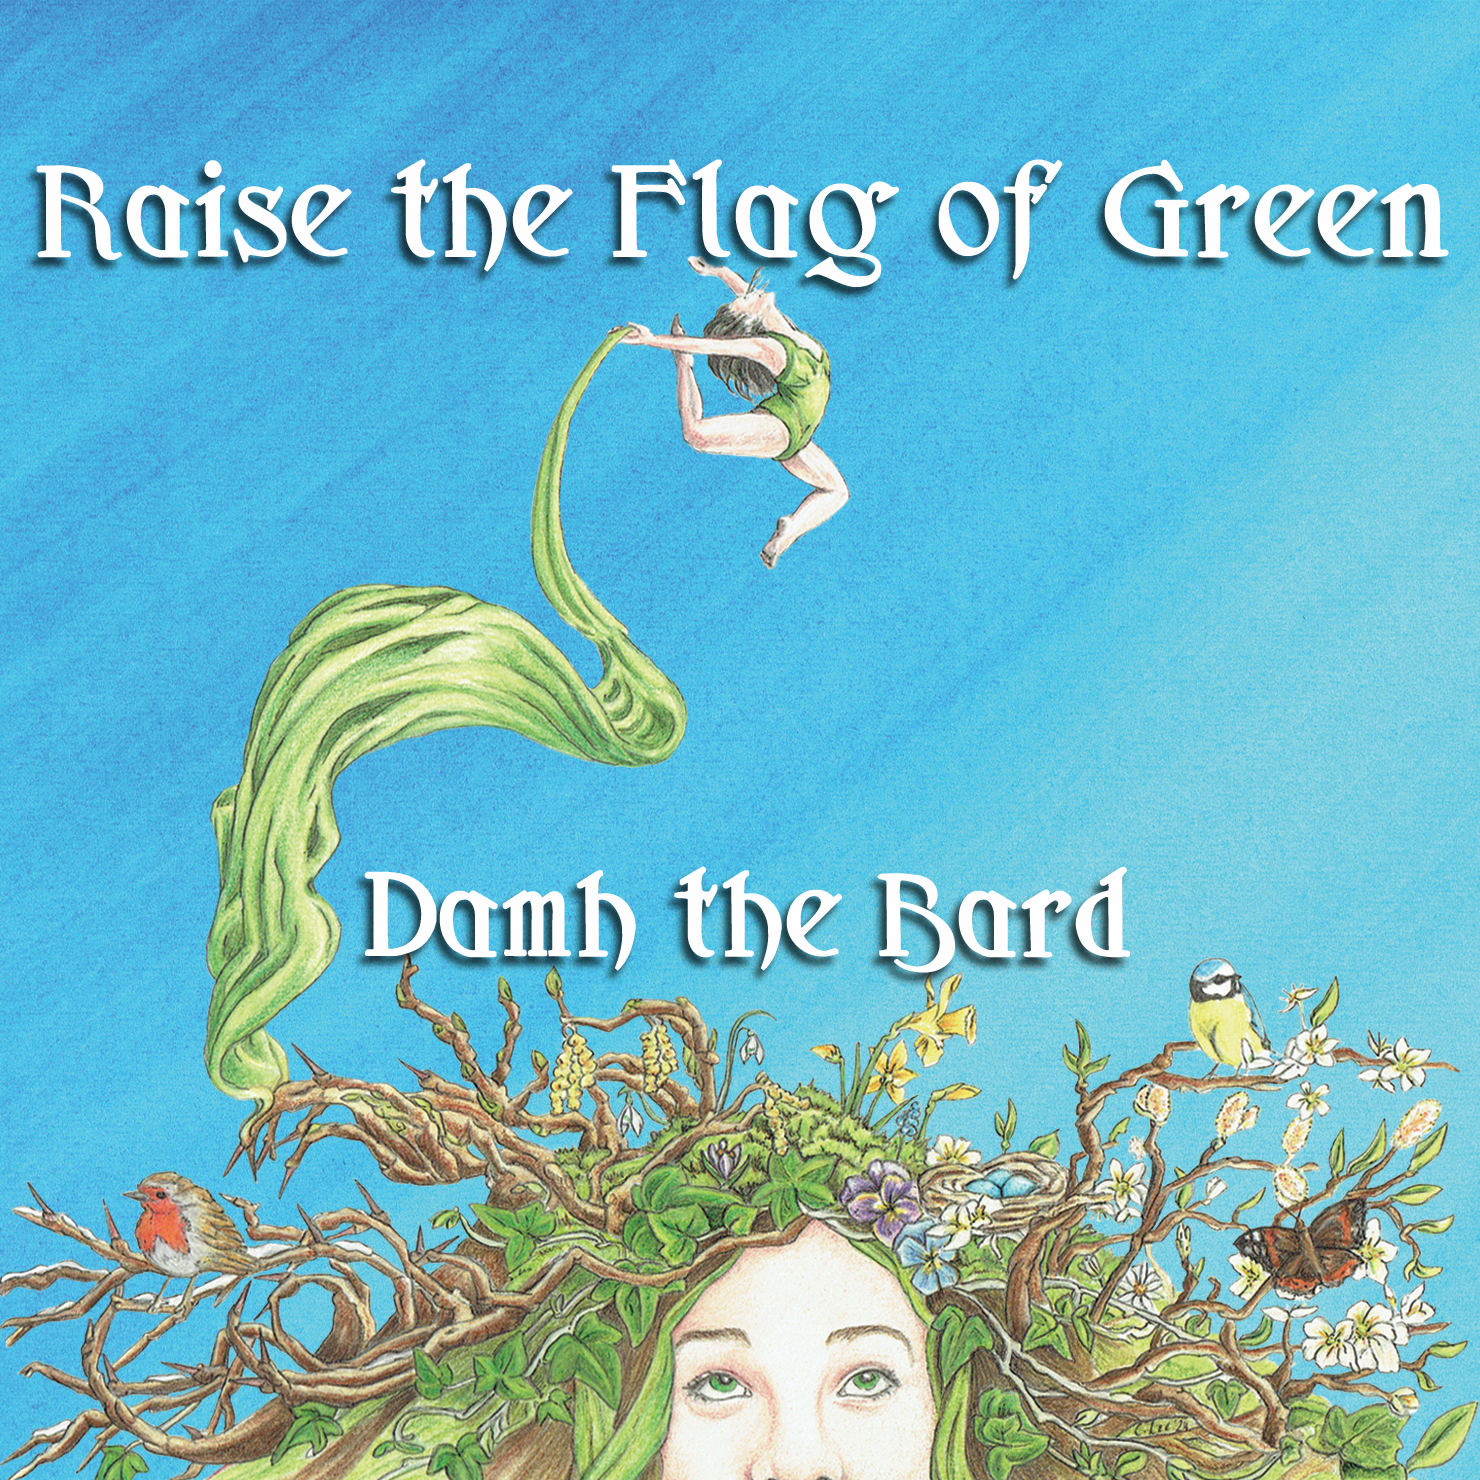 New Album release date – Raise the Flag of Green